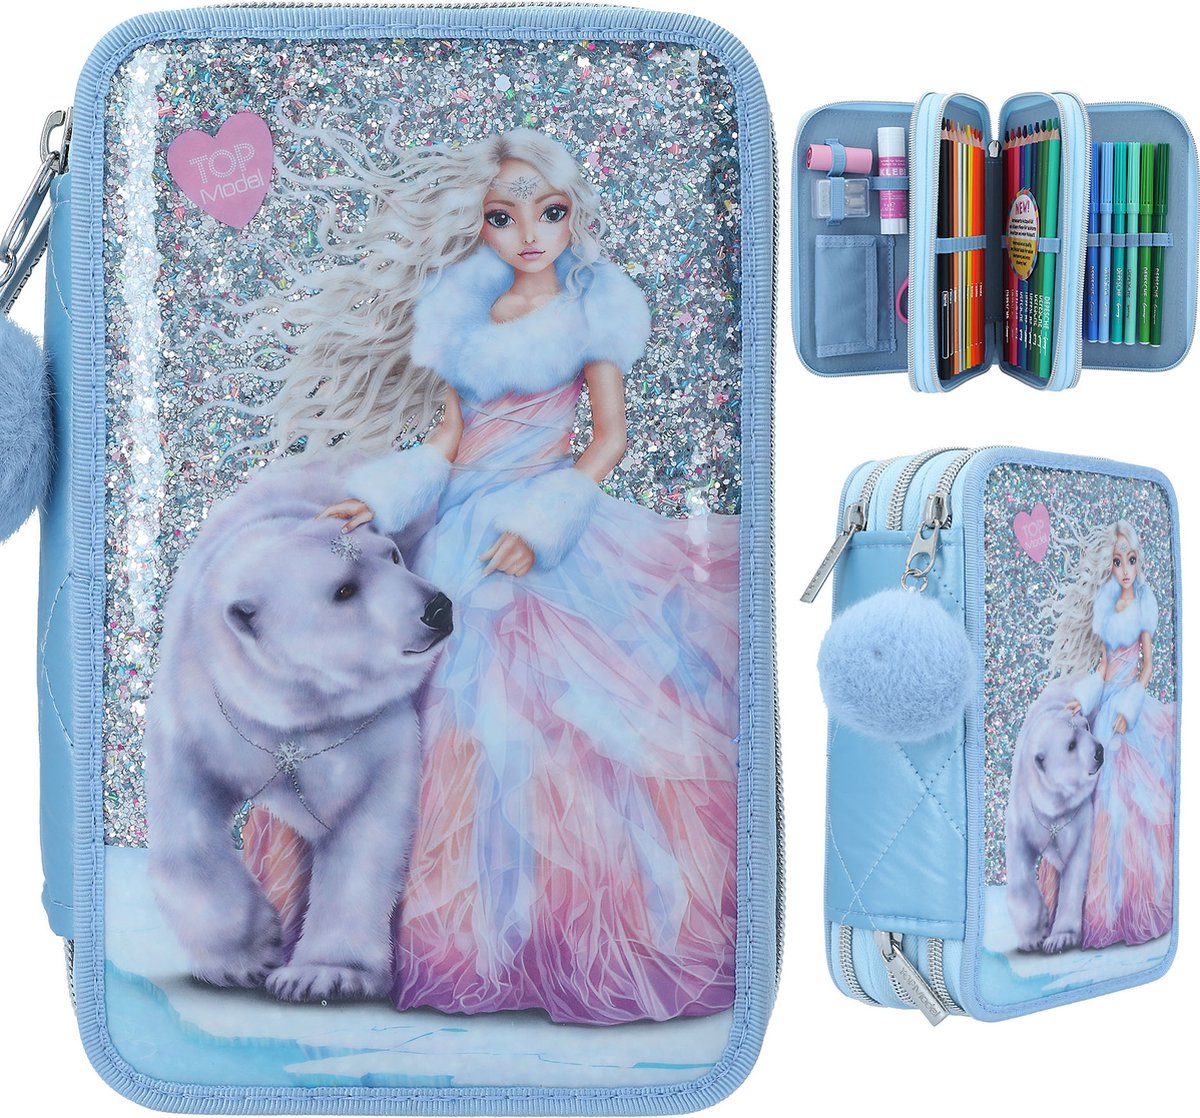 Trousse 3 compartiments Ice World Top Model : King Jouet, Bagages